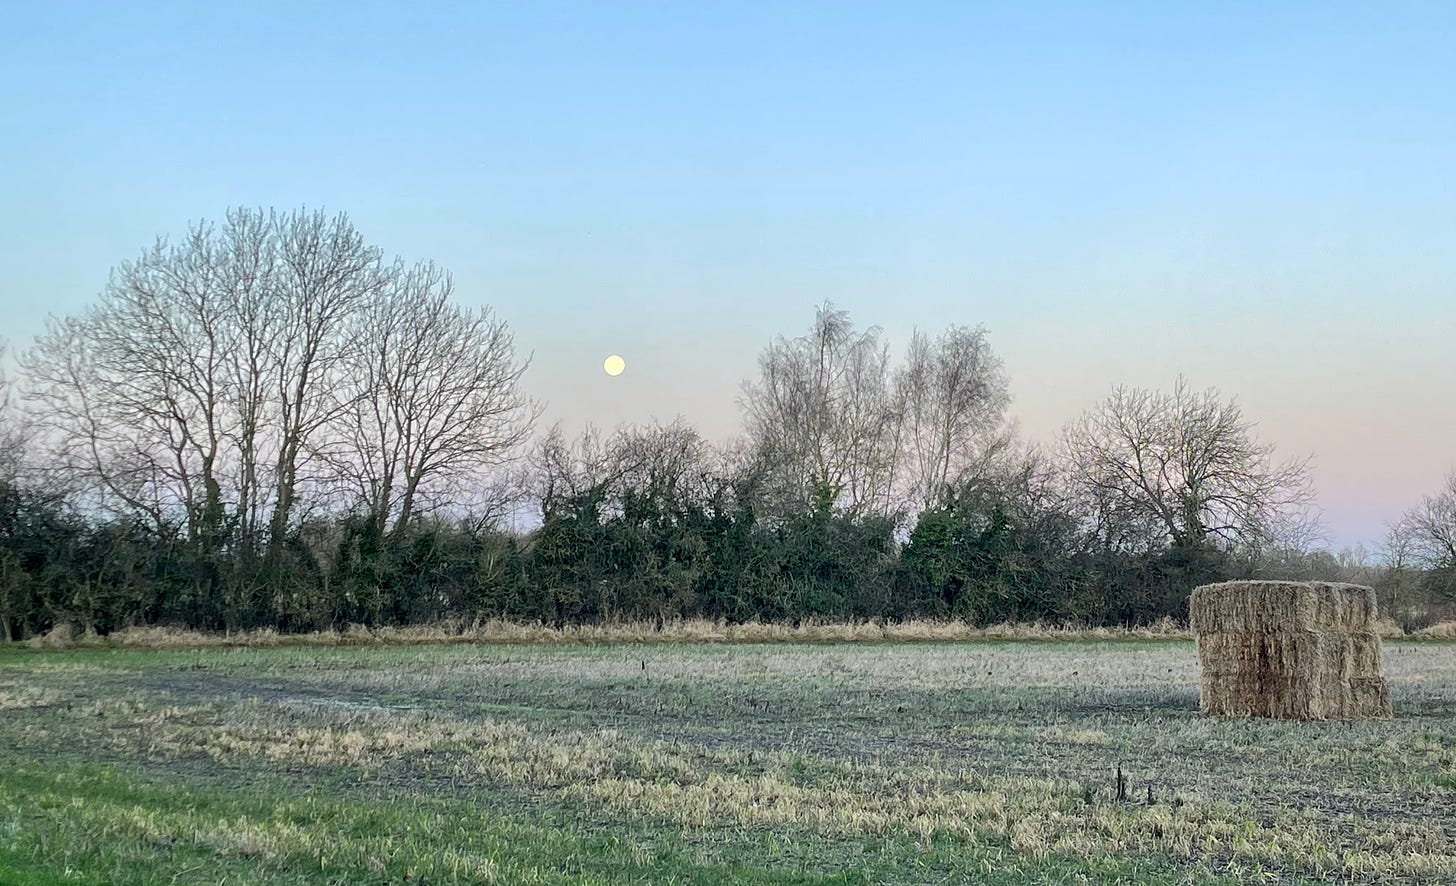 Full moon over a field